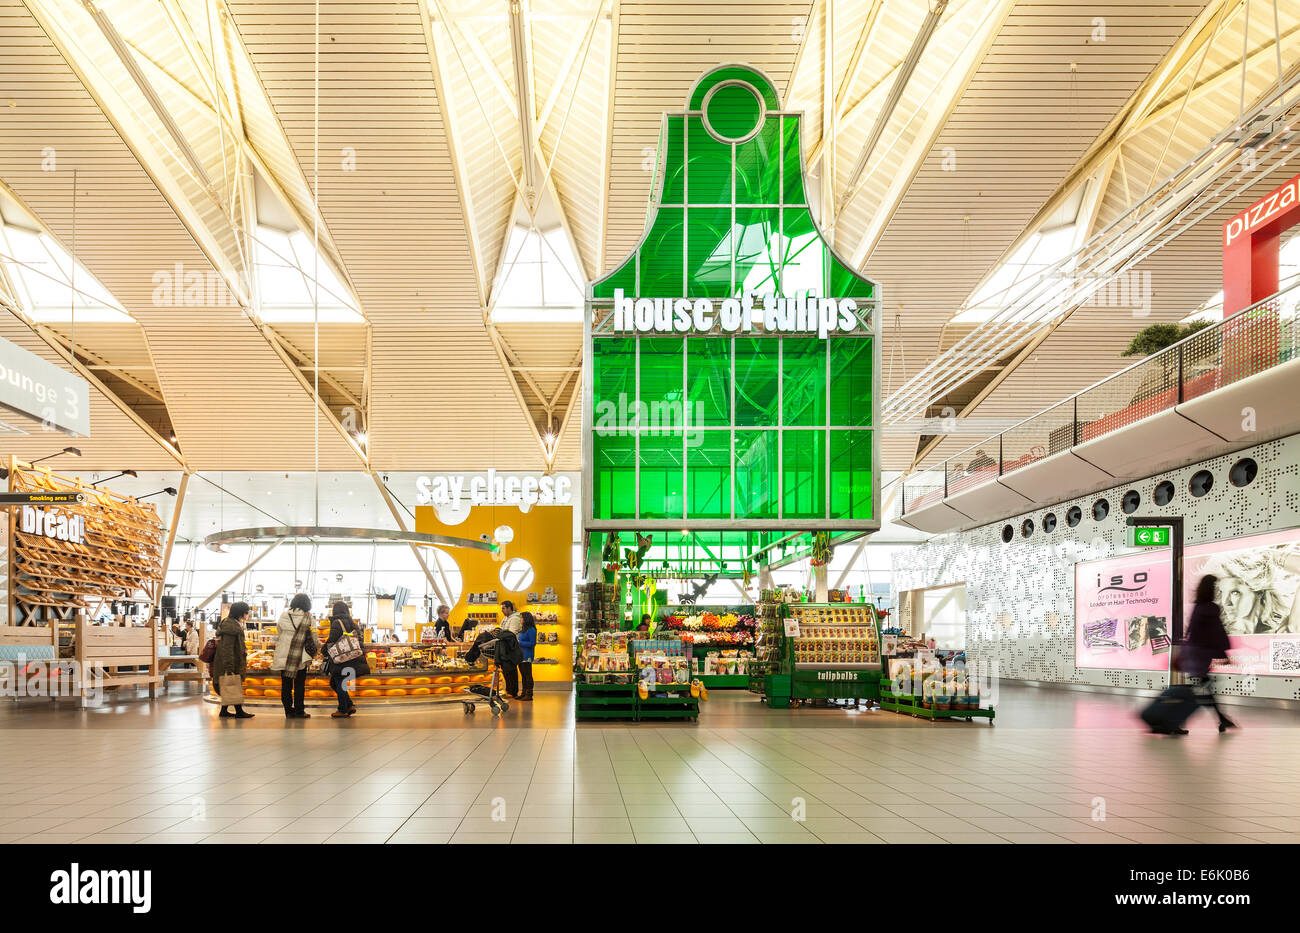 Amsterdam Schiphol Airport departure lounge 3 with Tulips Cheese souvenir souvenirs shop shops store stores passengers shopping Stock Photo